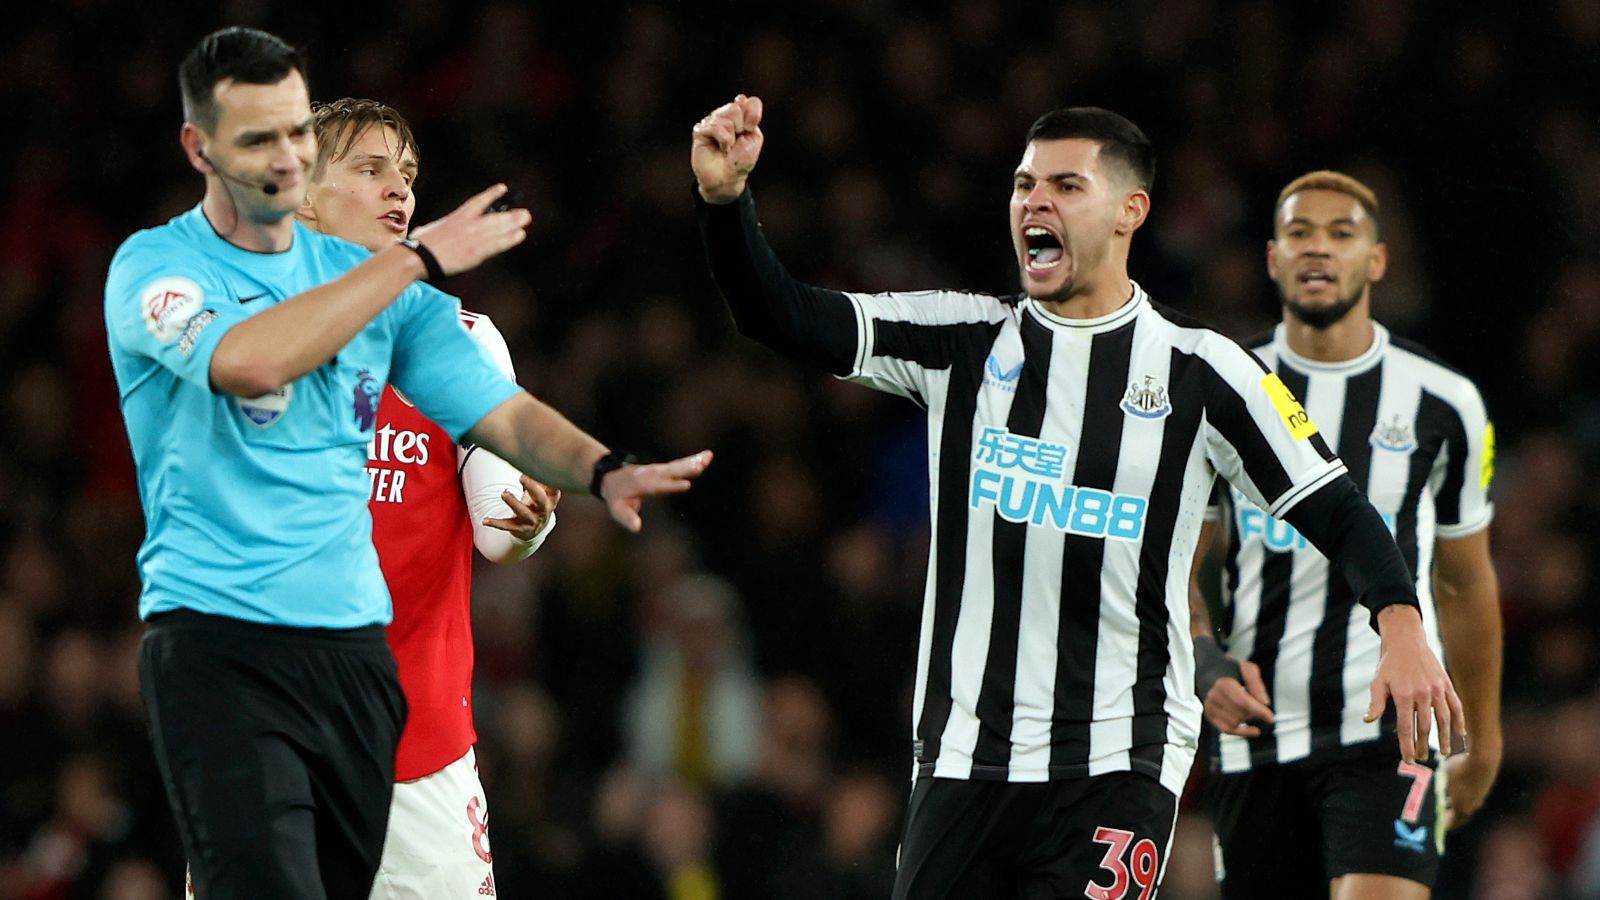 To maintain pressure on Man City, Arsenal passes the Newcastle test